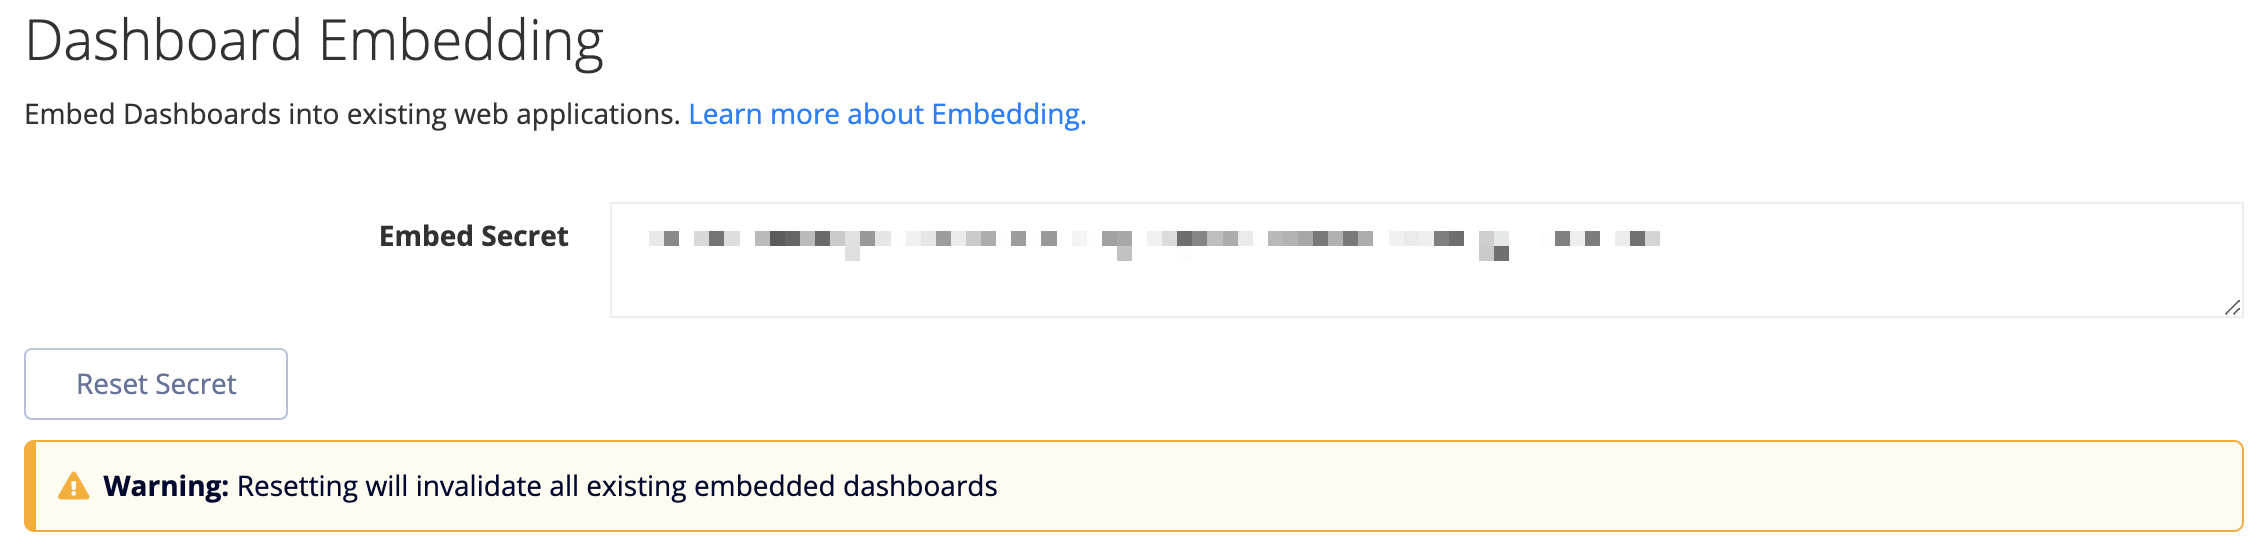 Get the Embed Secret Key from your org's Embedding page